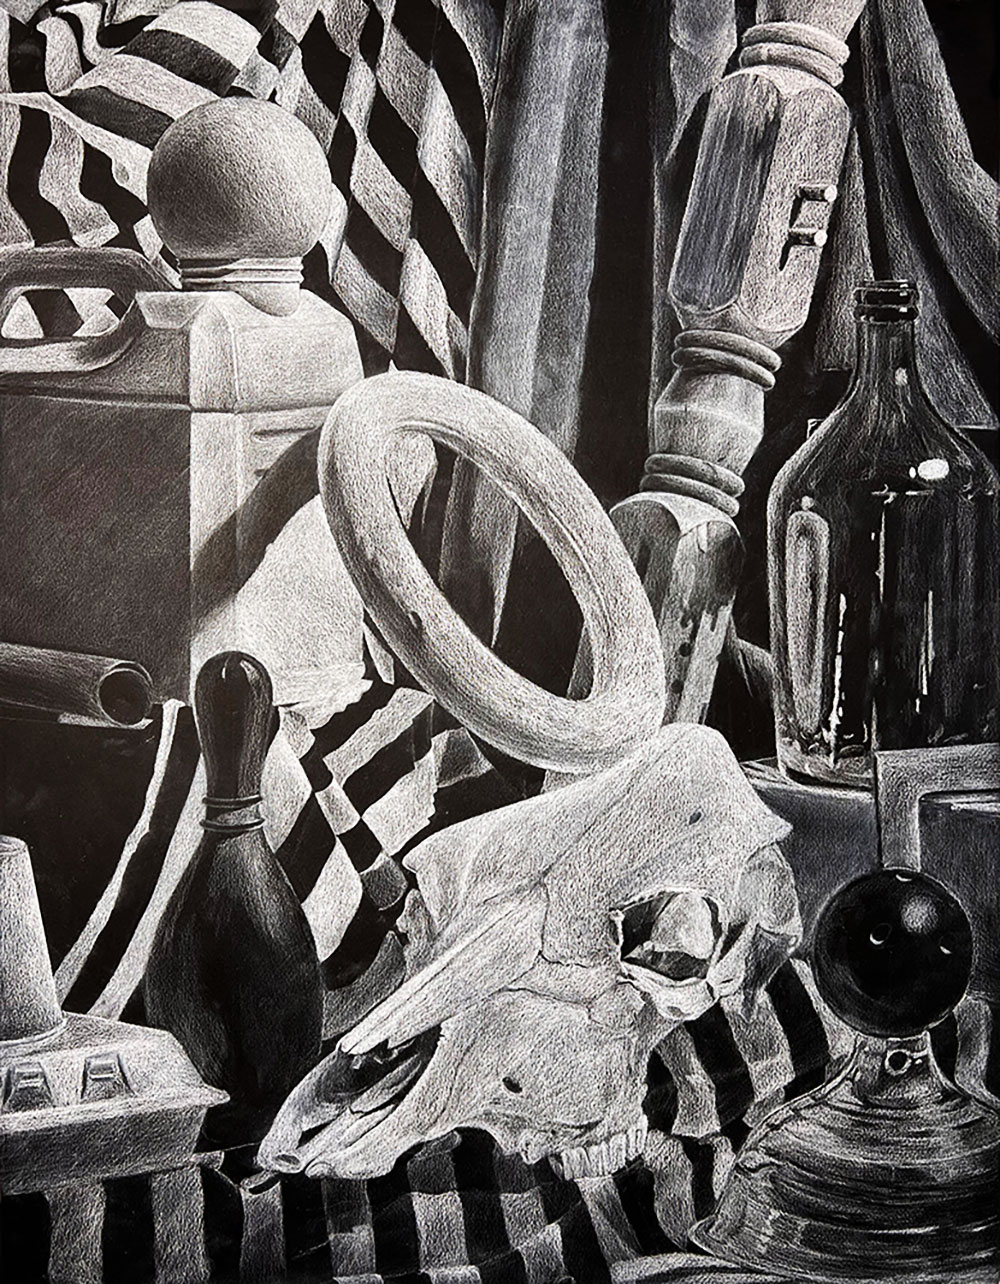 White charcoal drawing of a still life includes: a ball balancing on top of a can, a bowling ball and pin, and a skull.